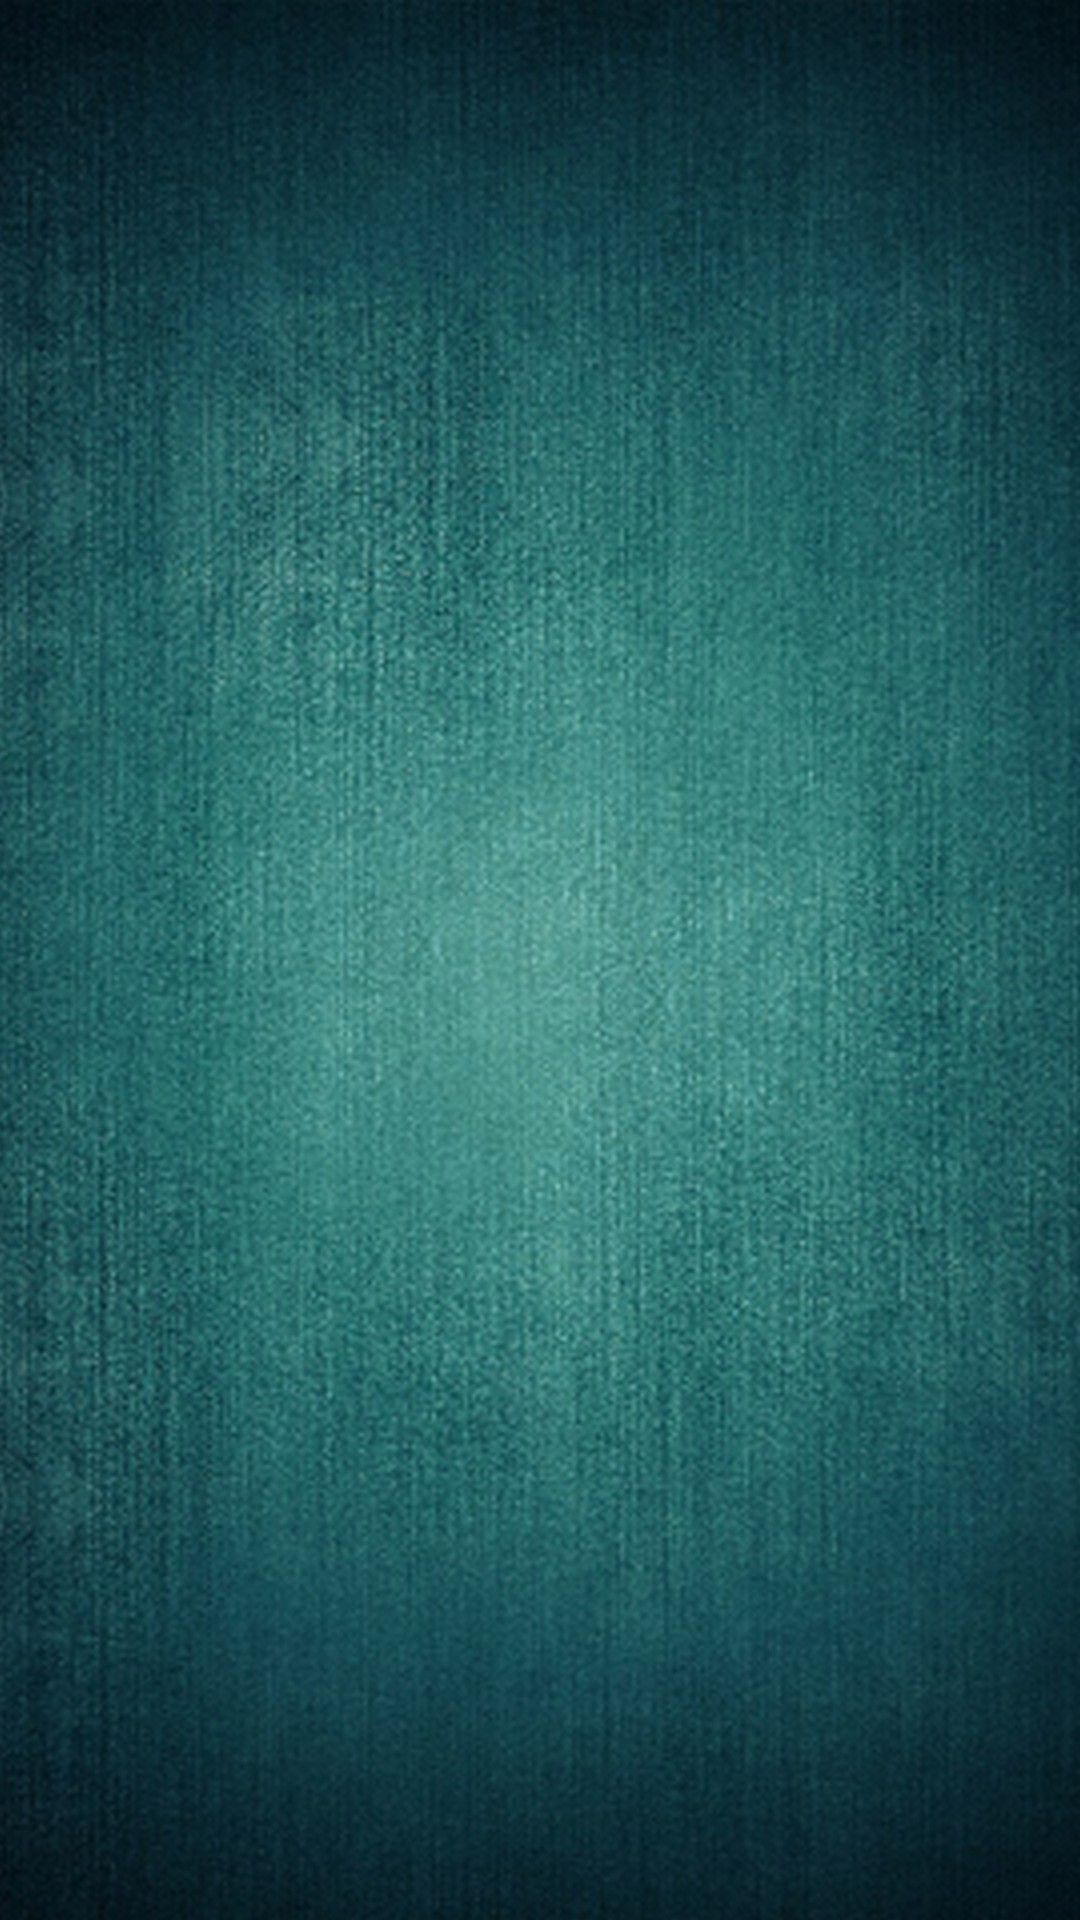 Iphone 7 Wallpaper Teal Color With Image Resolution - HD Wallpaper 